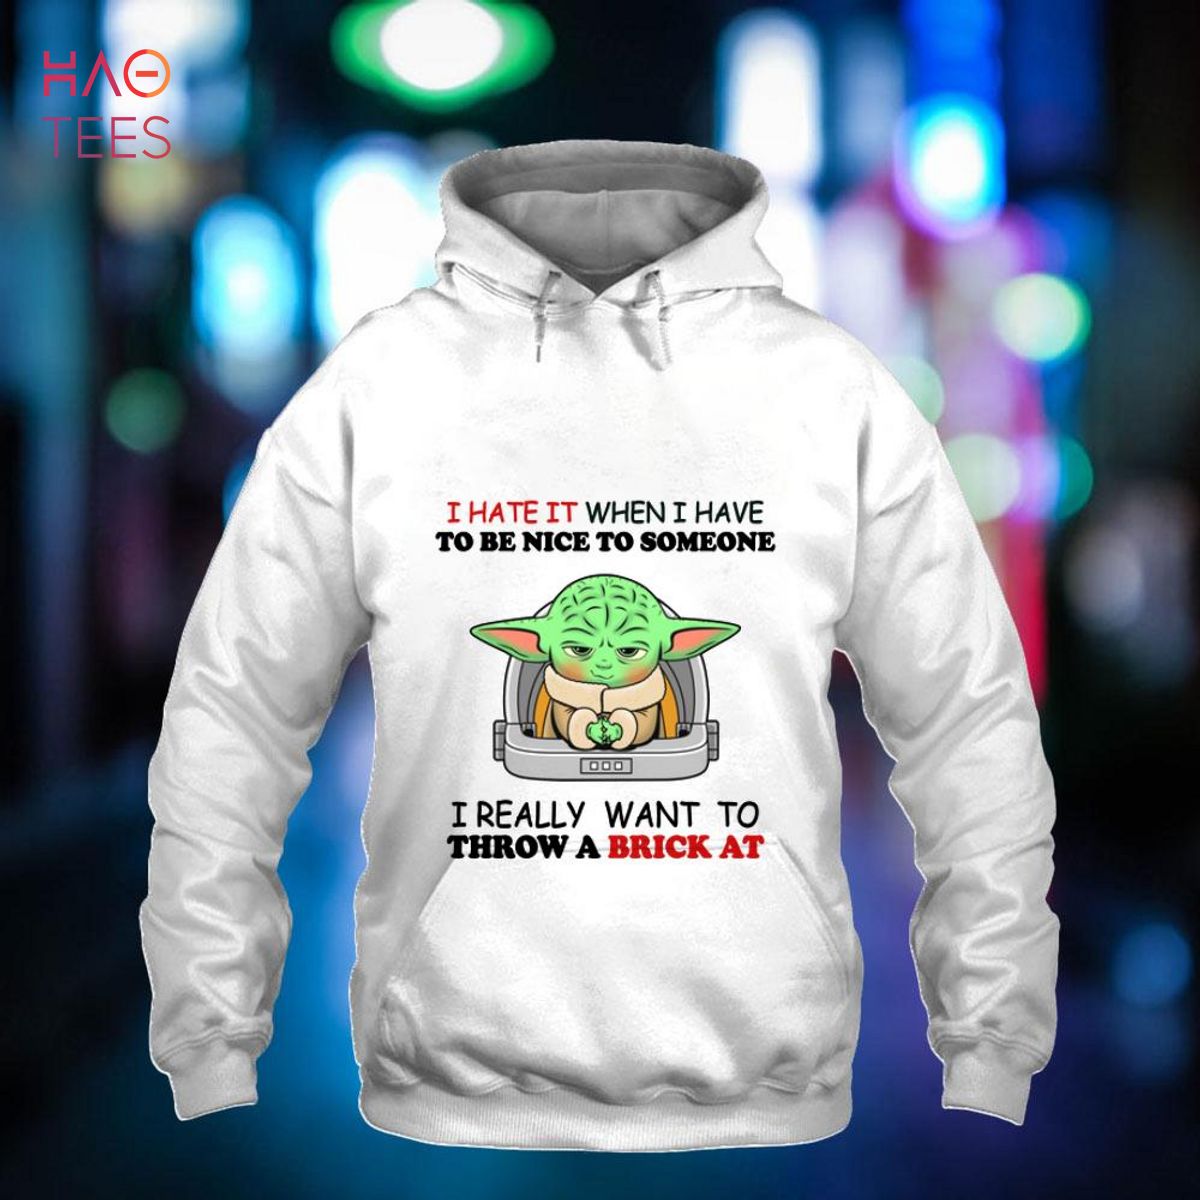 https://images.haotees.com/wp-content/uploads/2022/07/10133215/baby-yoda-i-hate-it-when-i-have-to-be-nice-to-someone-i-really-want-to-throw-a-brick-at-funny-shirt-4-QXAkC.jpg